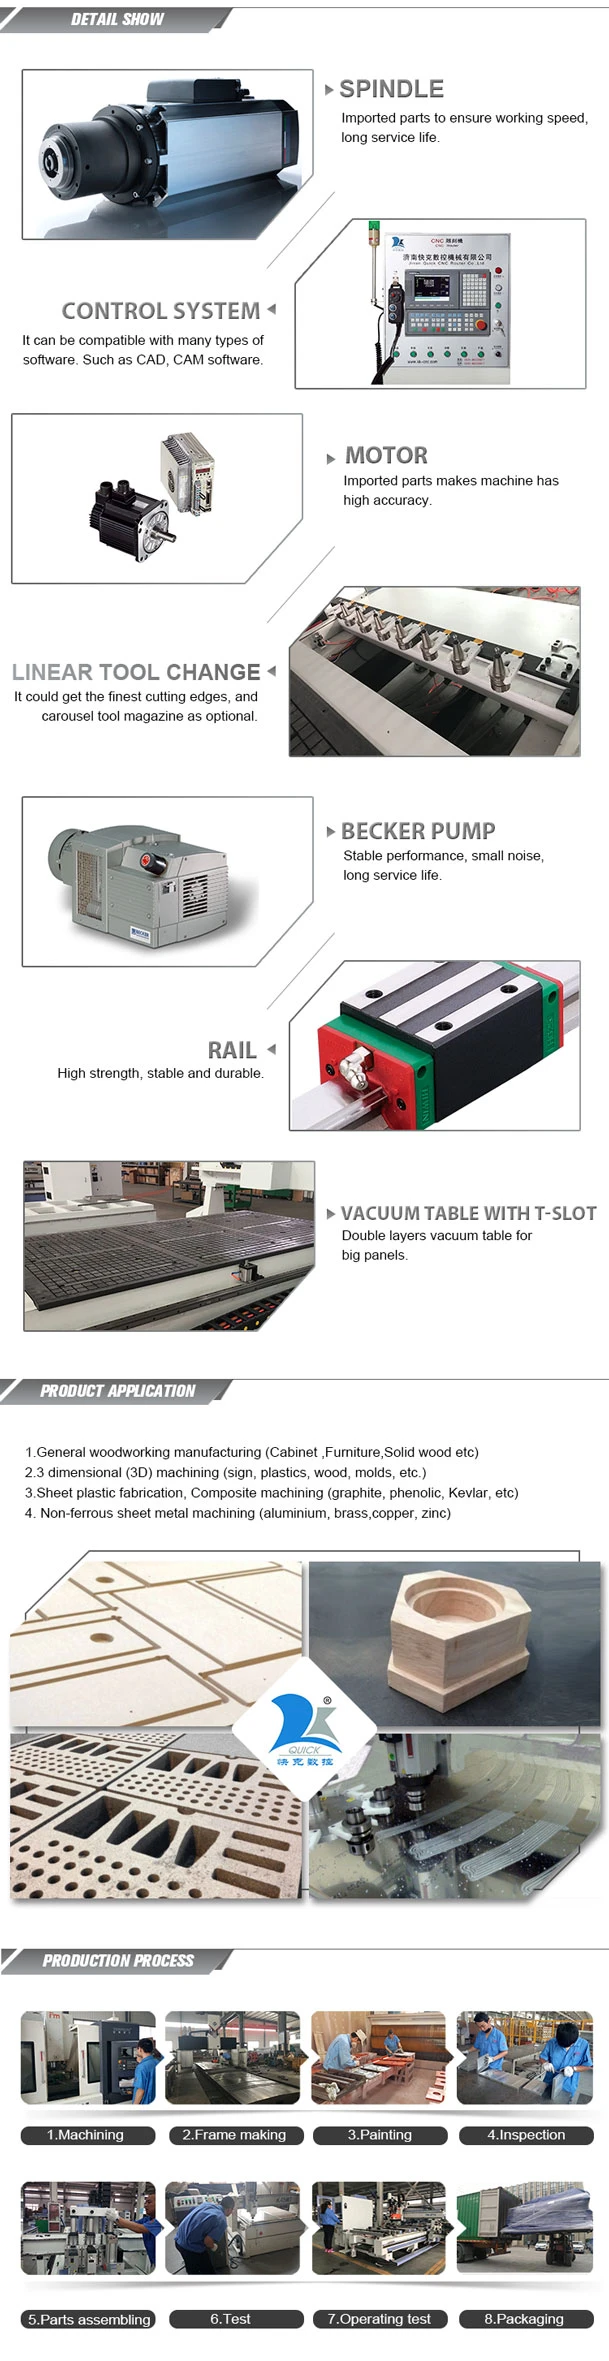 Heavy Machine CNC Router Wood Plate Cutting and Carving Machine Wooded Materials 1325 1530